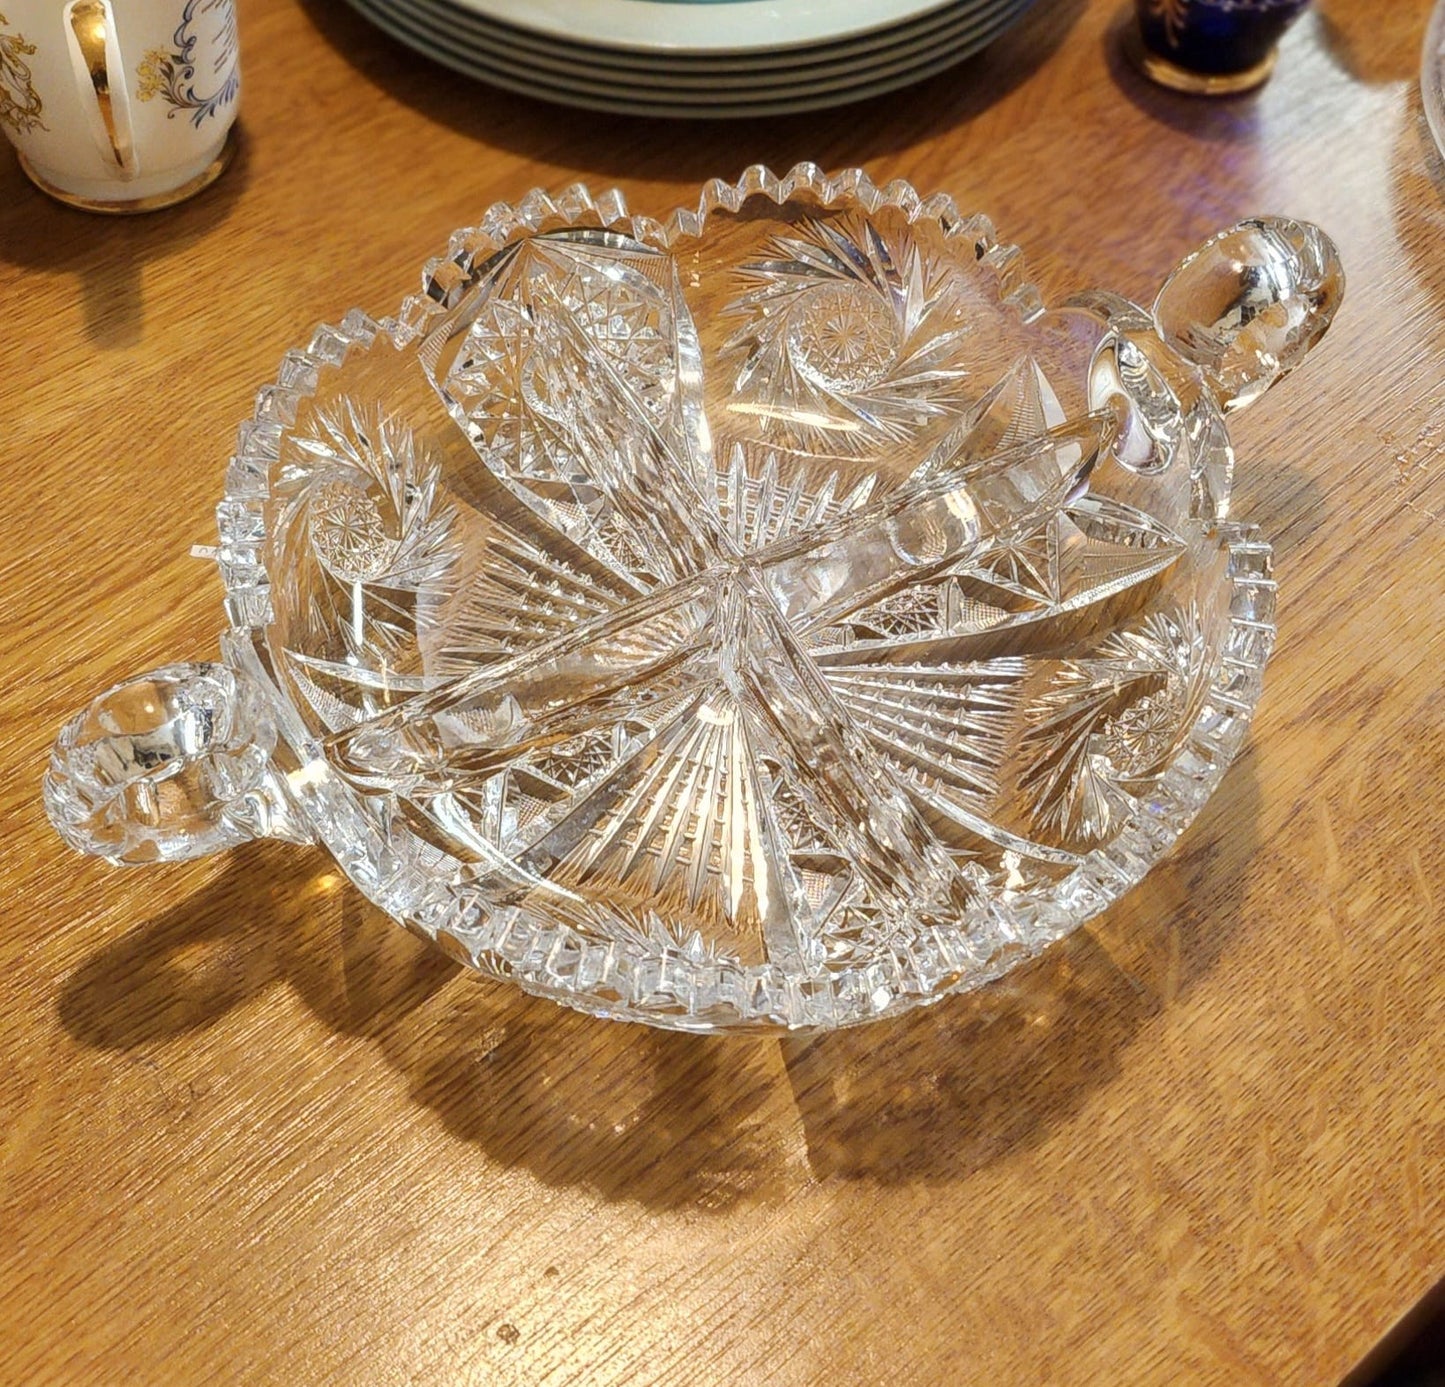 Waterford FINE CUT GLASS BOWLS Double-handled with four-part interior. minor chip on 1 small corner  L 33cm x D 24cm x h 6 cm